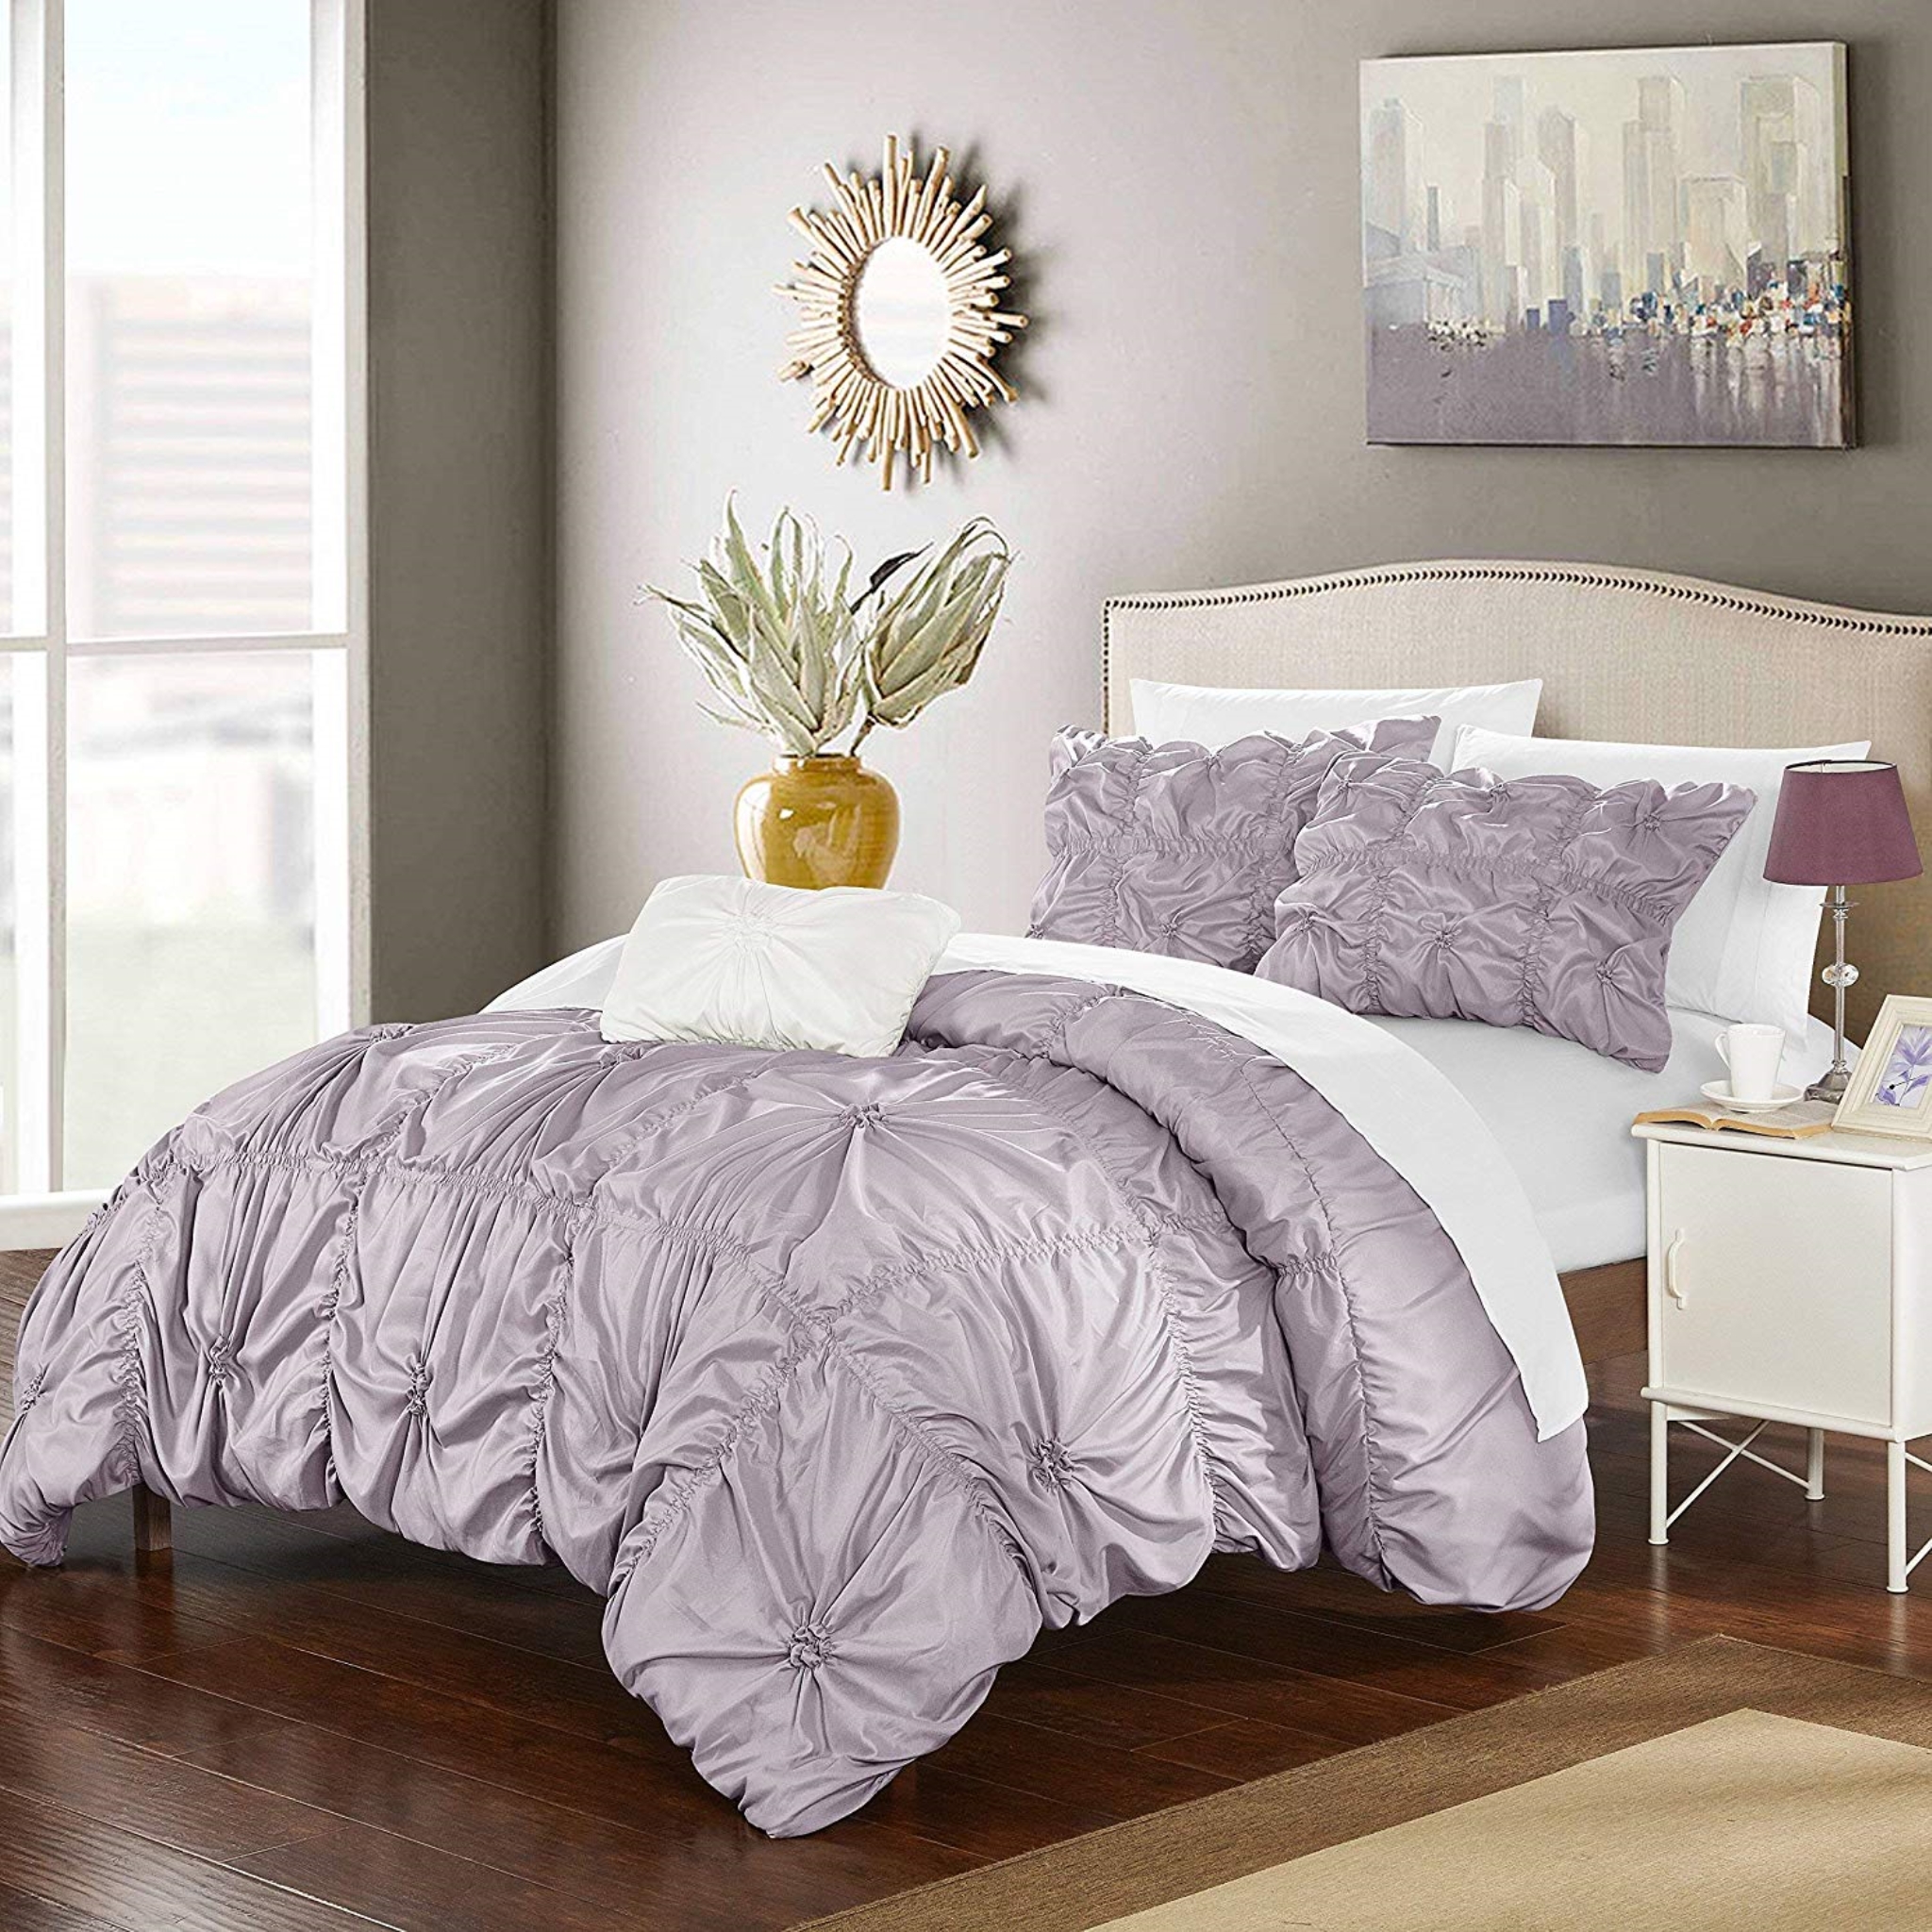 Chic Home 4 Piece Pleat Ruffled Embellished Duvet Cover Set, Queen ...